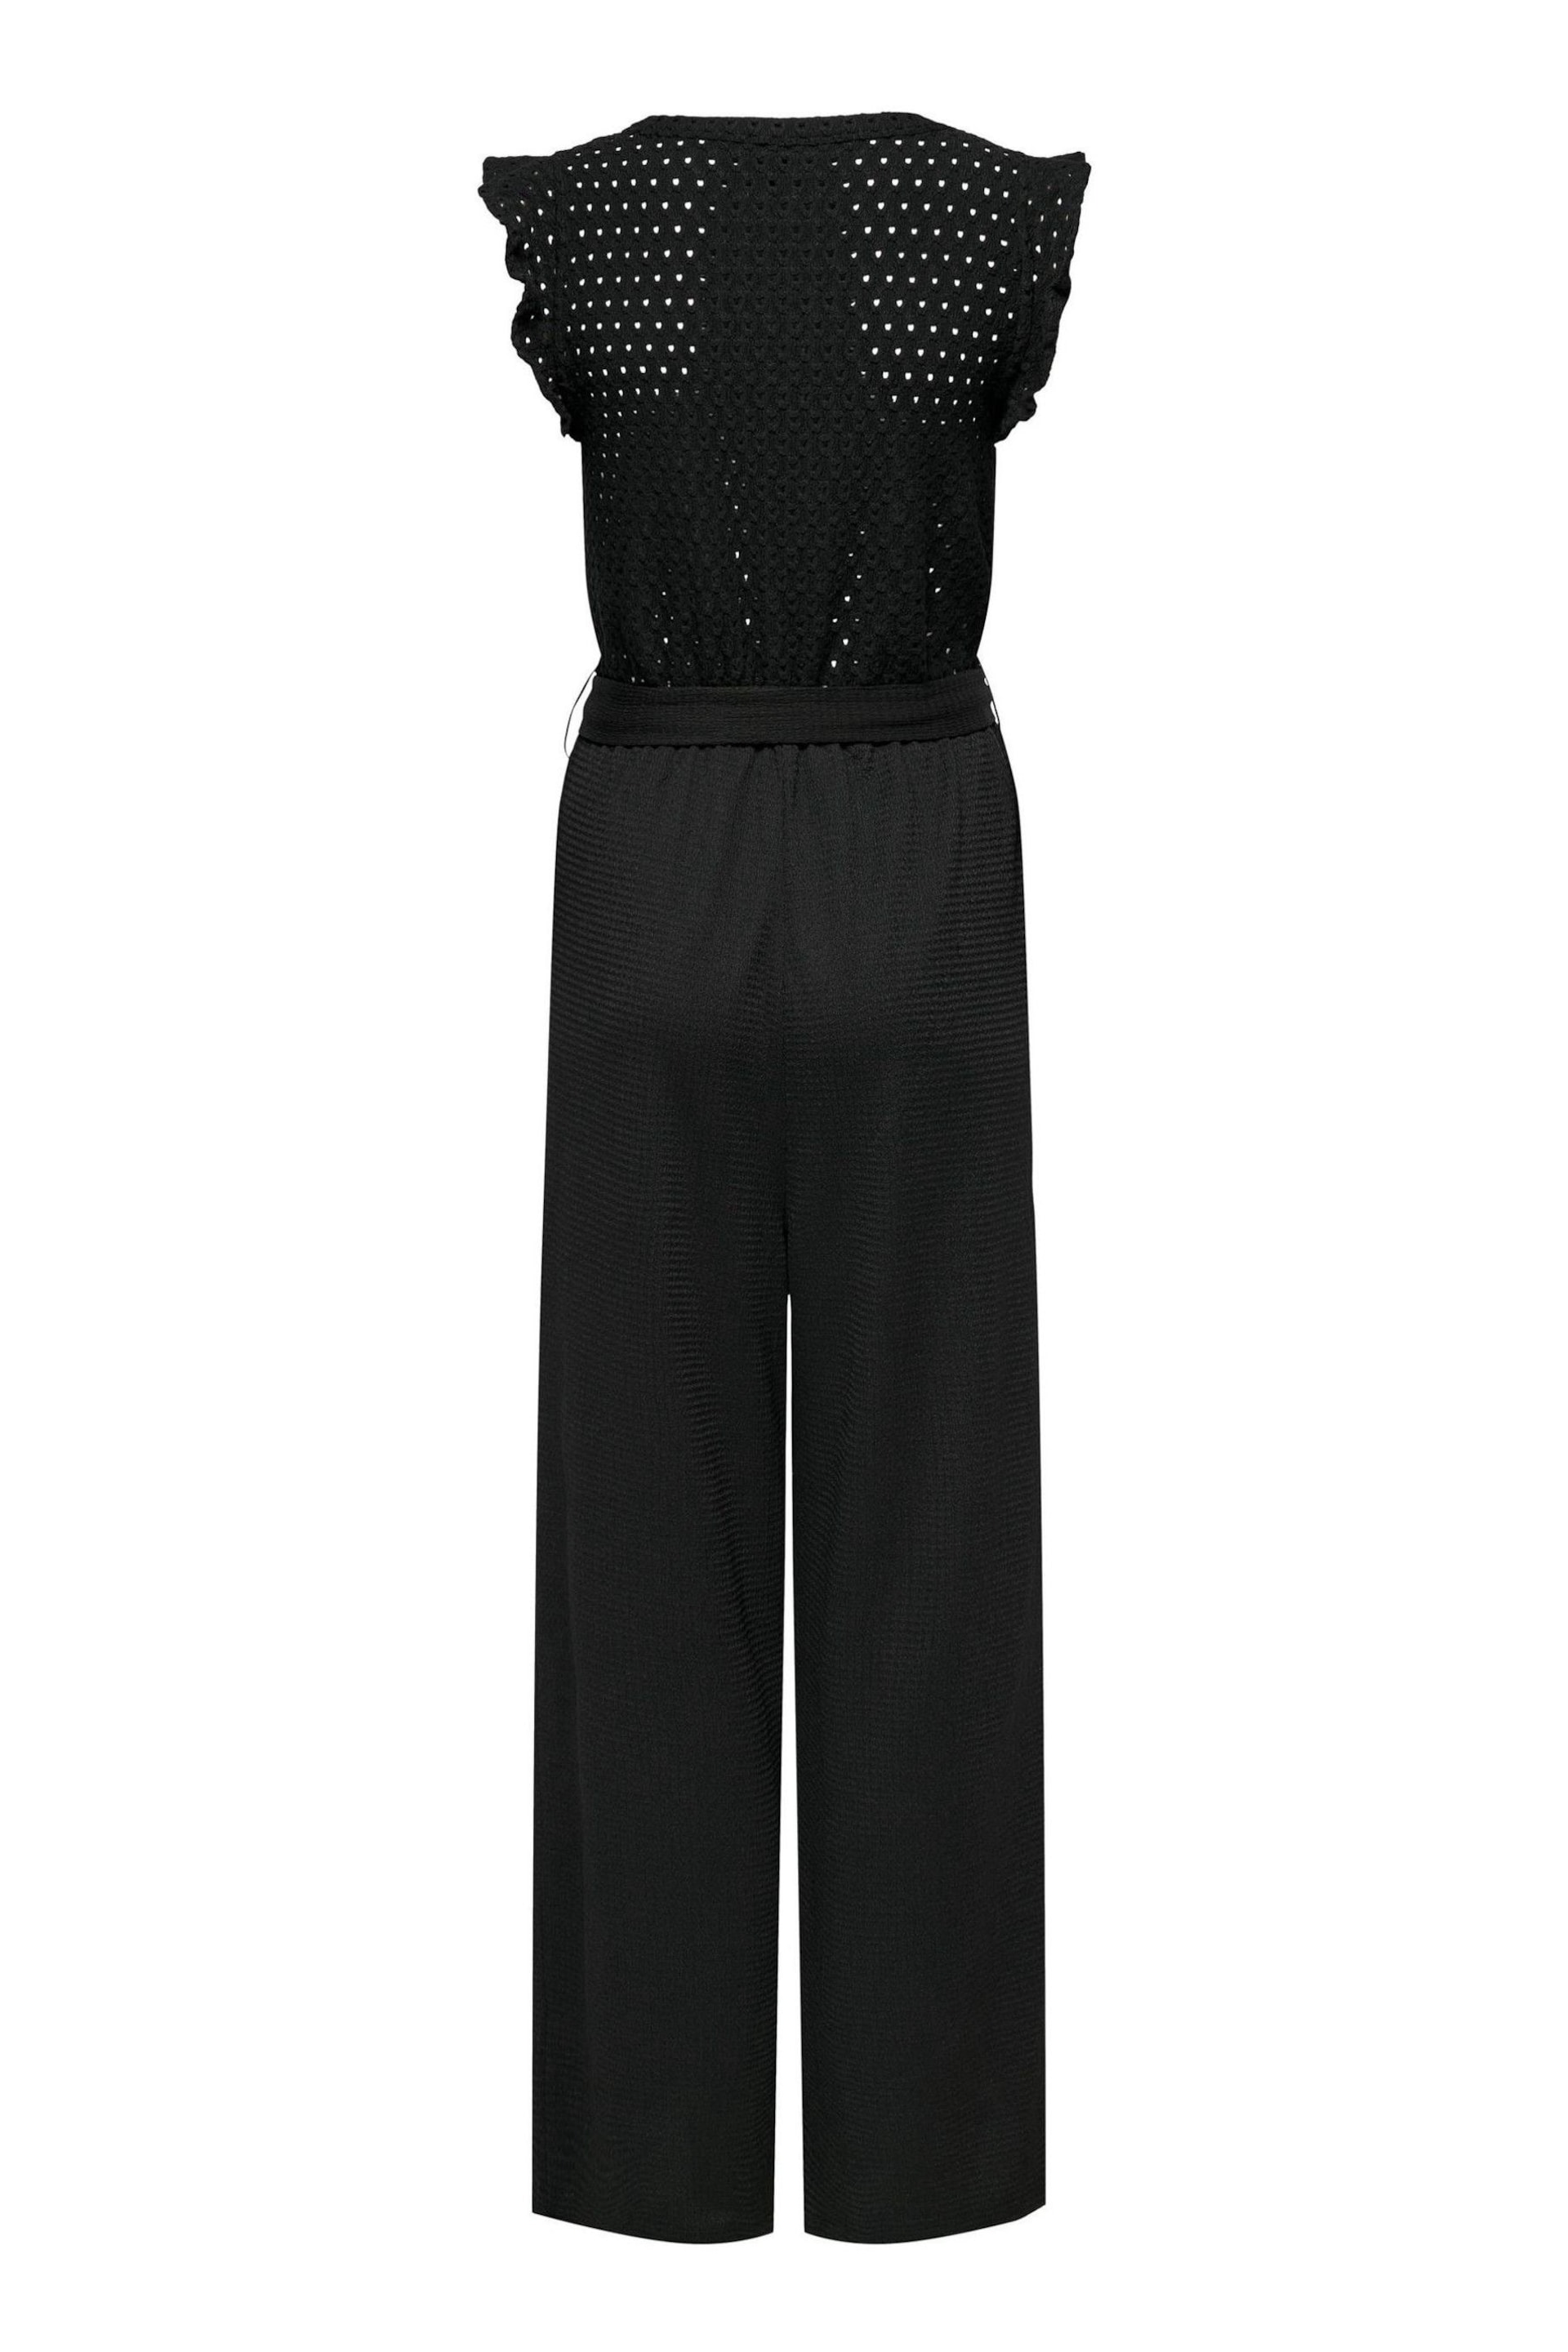 ONLY Black Broderie Top Frill Slevee Wide Leg Jumpsuit - Image 6 of 6